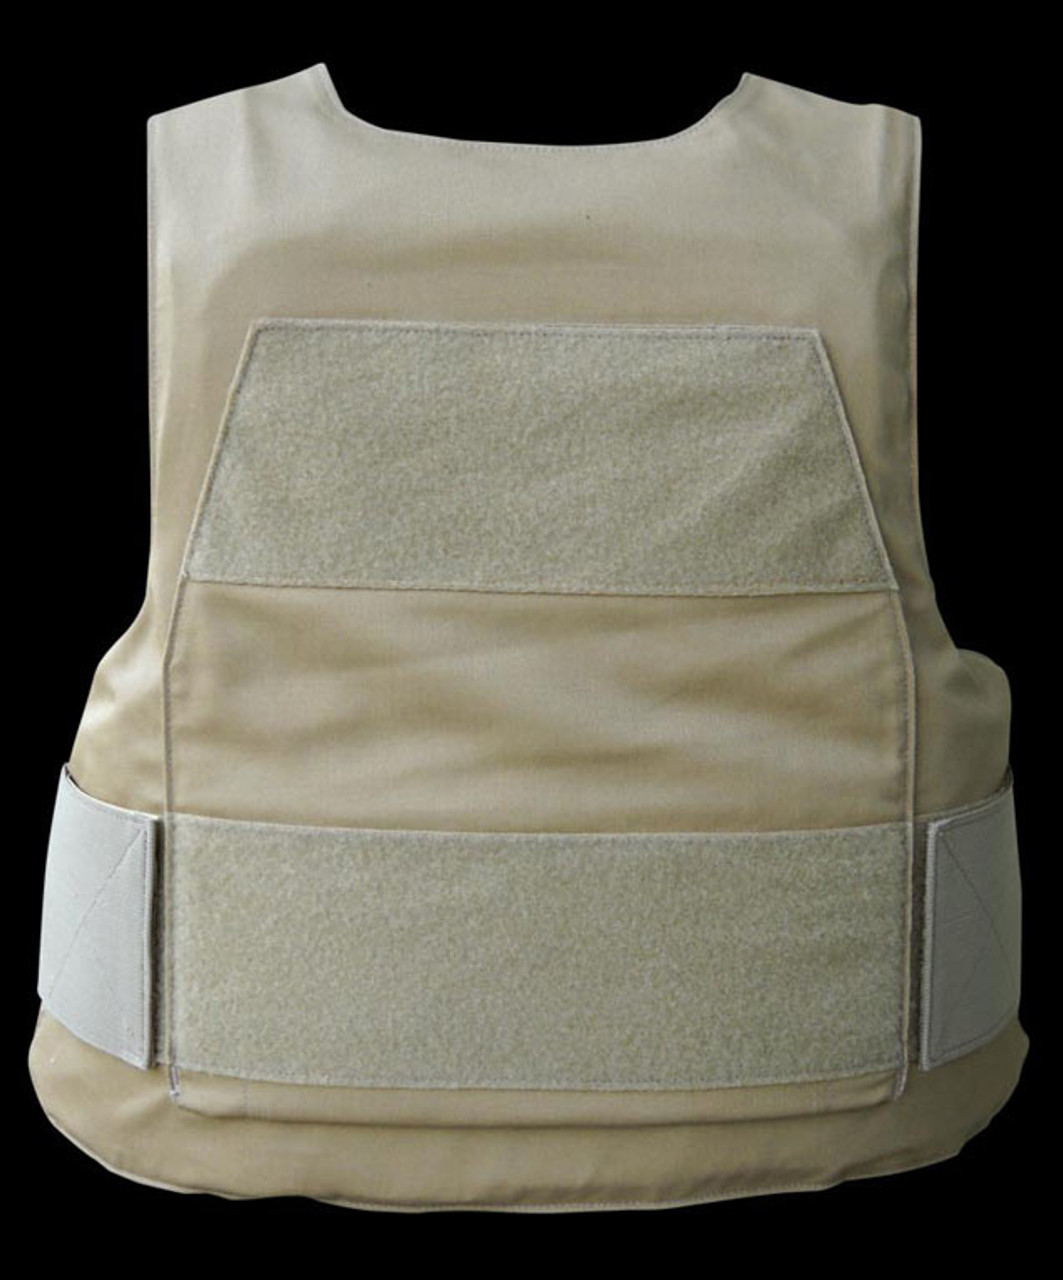 Point Blank FAS-CP Hidden Ballistic Body Armor Vest, For Military and Police, Available with NIJ .06 Level IIA, II and IIIA Ballistic Systems